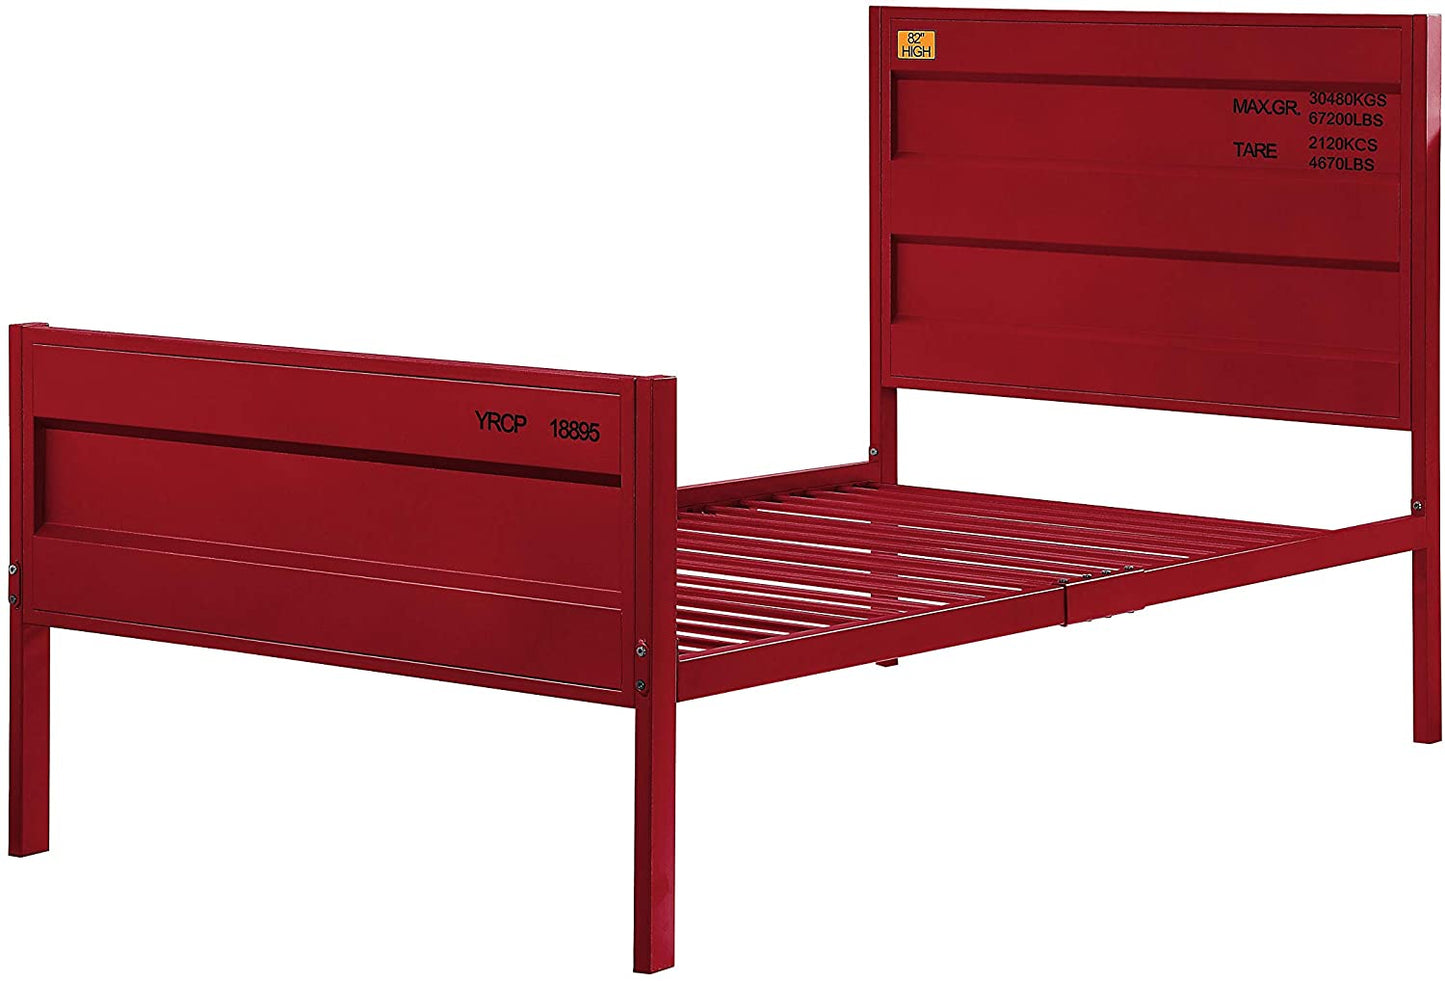 Cargo Twin Bed, Red